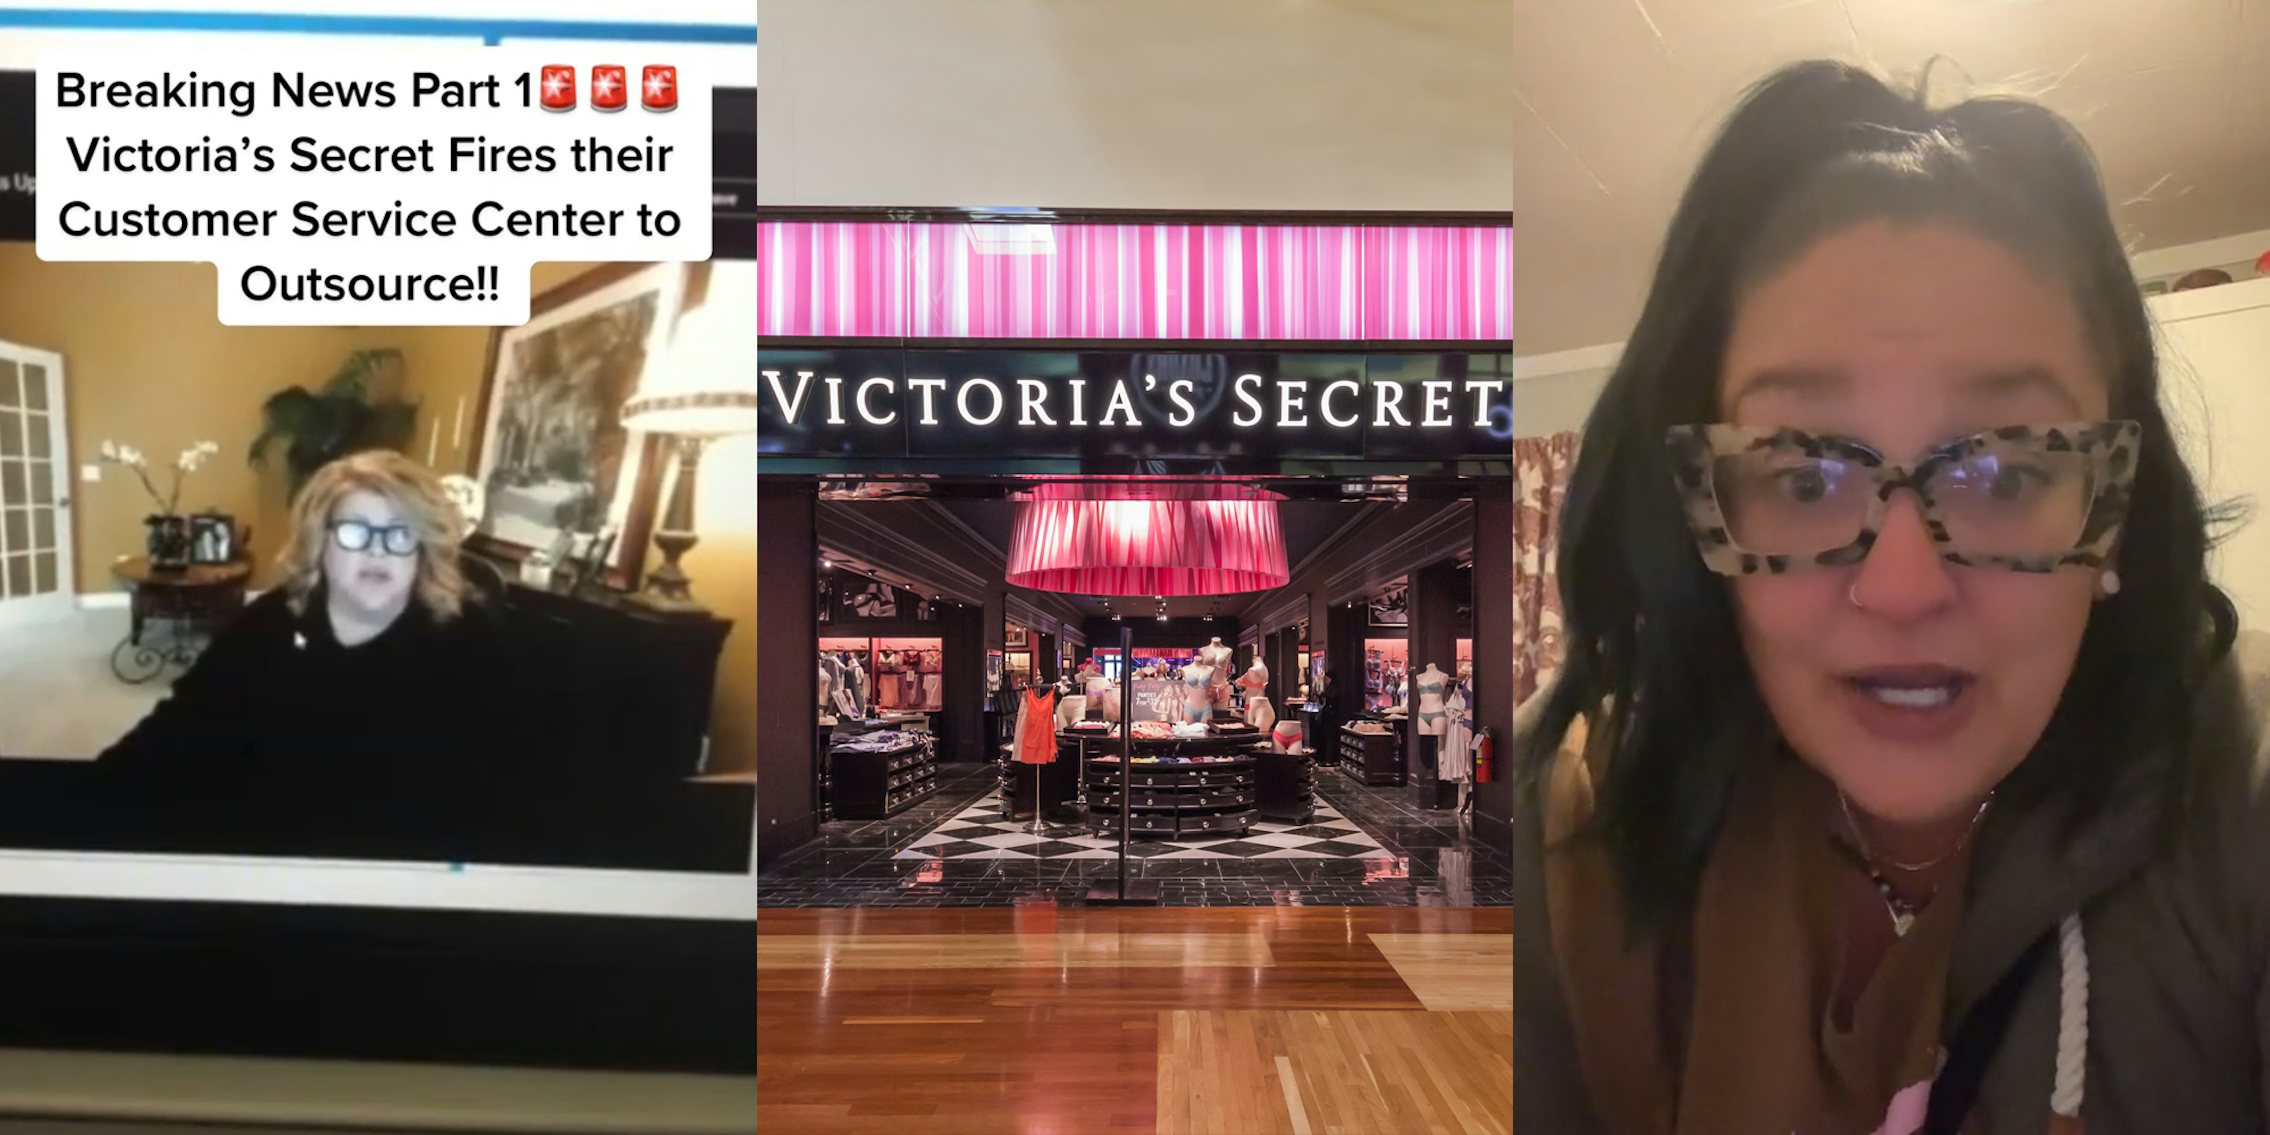 meeting on laptop with caption 'Breaking News Part1 Victoria's Secret Fires their Customer Service Center to Outsource!!' (l) Victoria's Secret store in mall with sign (c) former Victoria's Secret employee speaking (r)